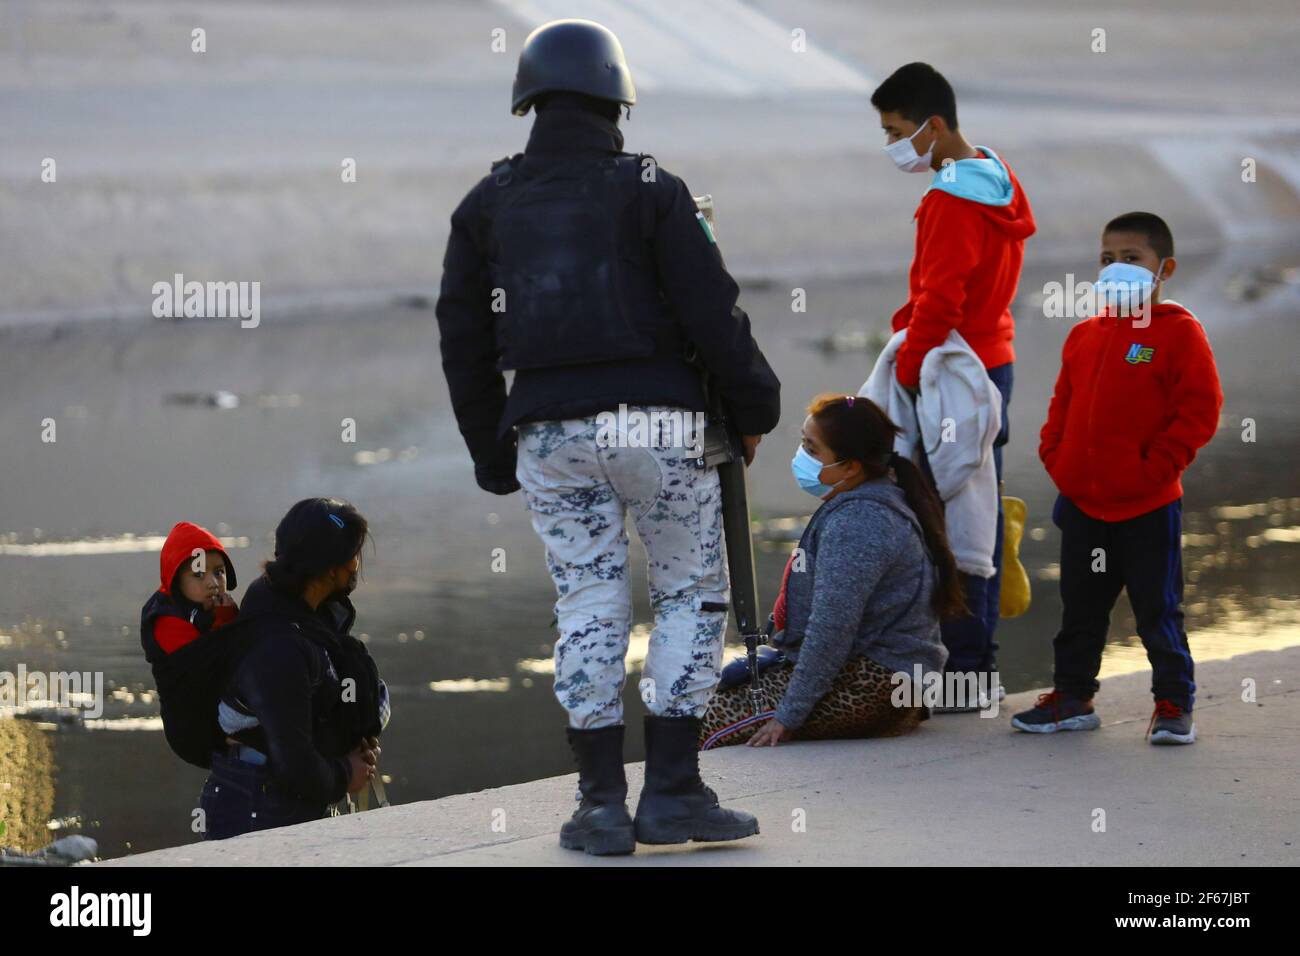 A member of the Guardia Nacional  (National Guard) speaks with a family of migrants before crossing the Rio Bravo river to turn themselves into U.S Border Patrol agents to request asylum in El Paso, Texas, U.S., as seen from Ciudad Juarez, Mexico, March 30, 2021. REUTERS/Edgard Garrido Stock Photo